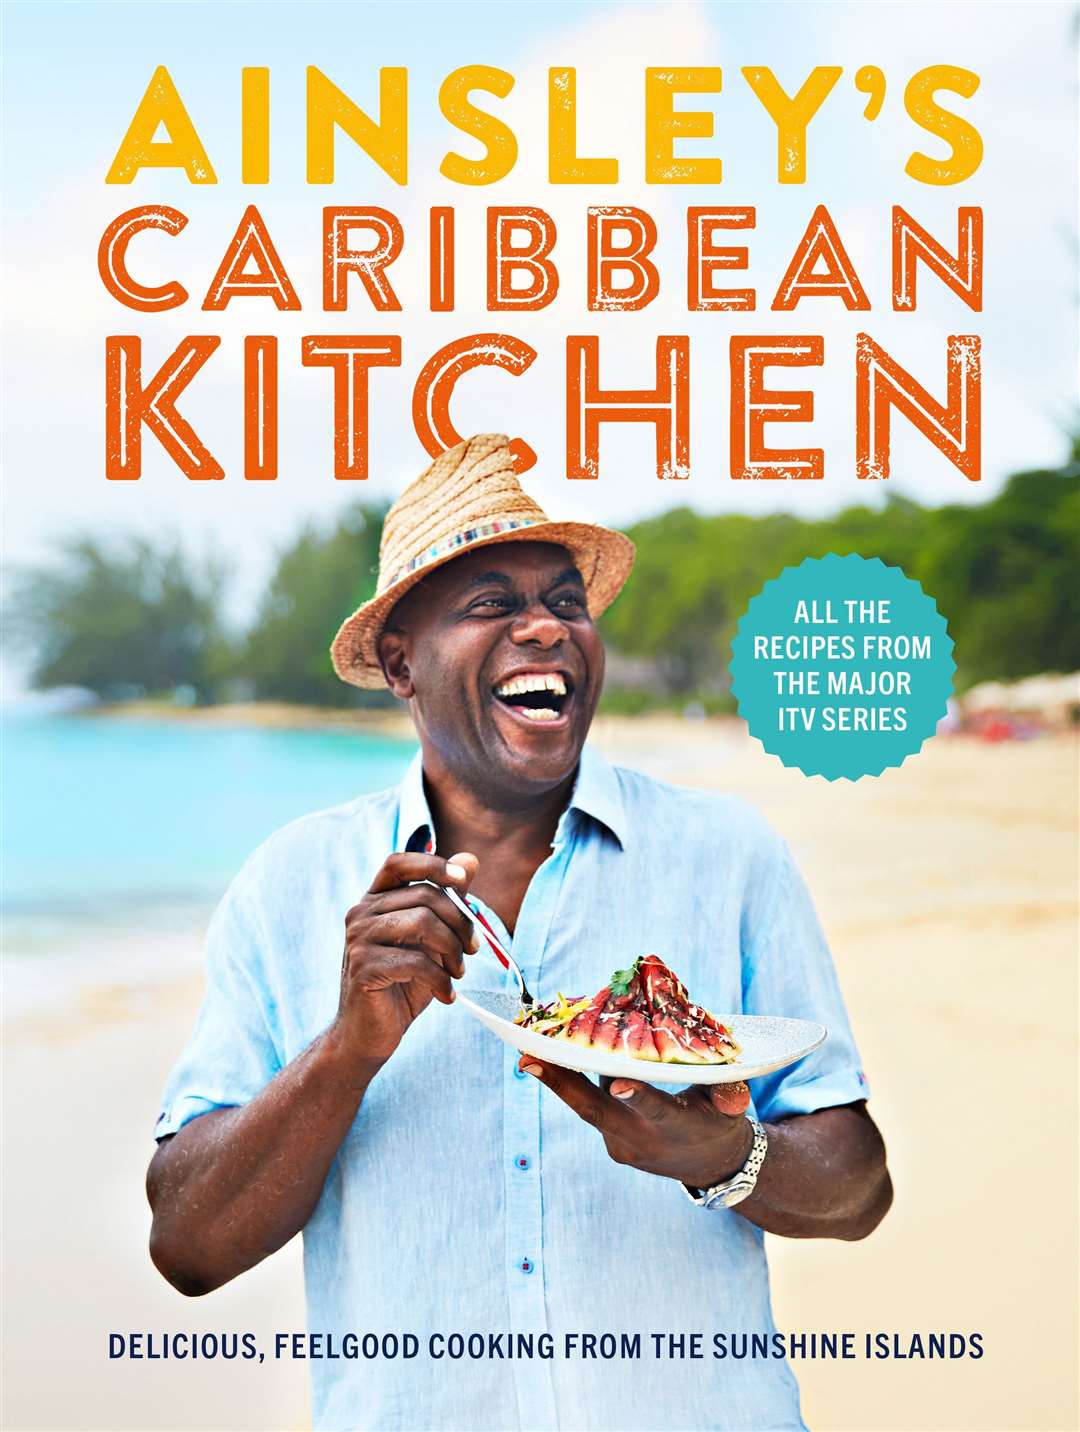 Ainsley’s Caribbean Kitchen by Ainsley Harriott, is published by Ebury Press, priced £20. Available now.